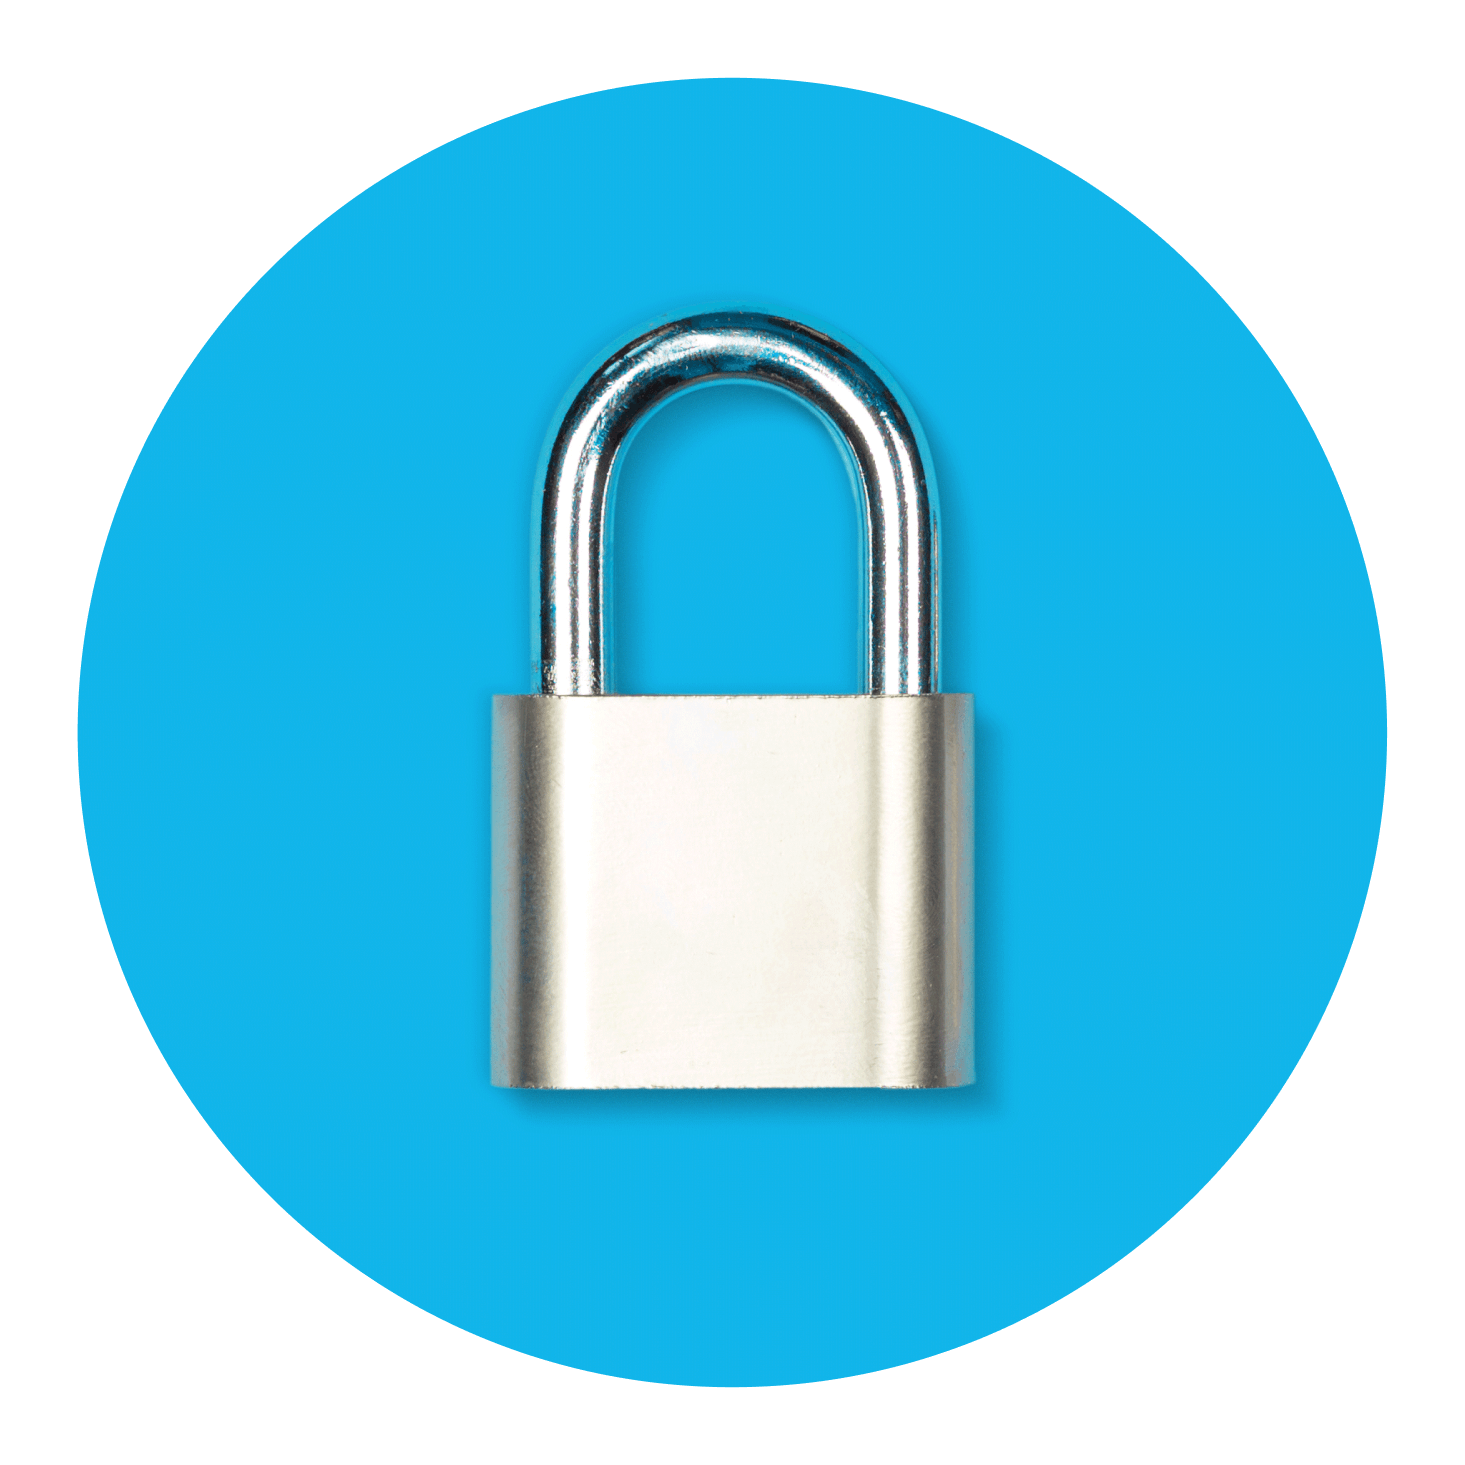 Your Xero data is well protected